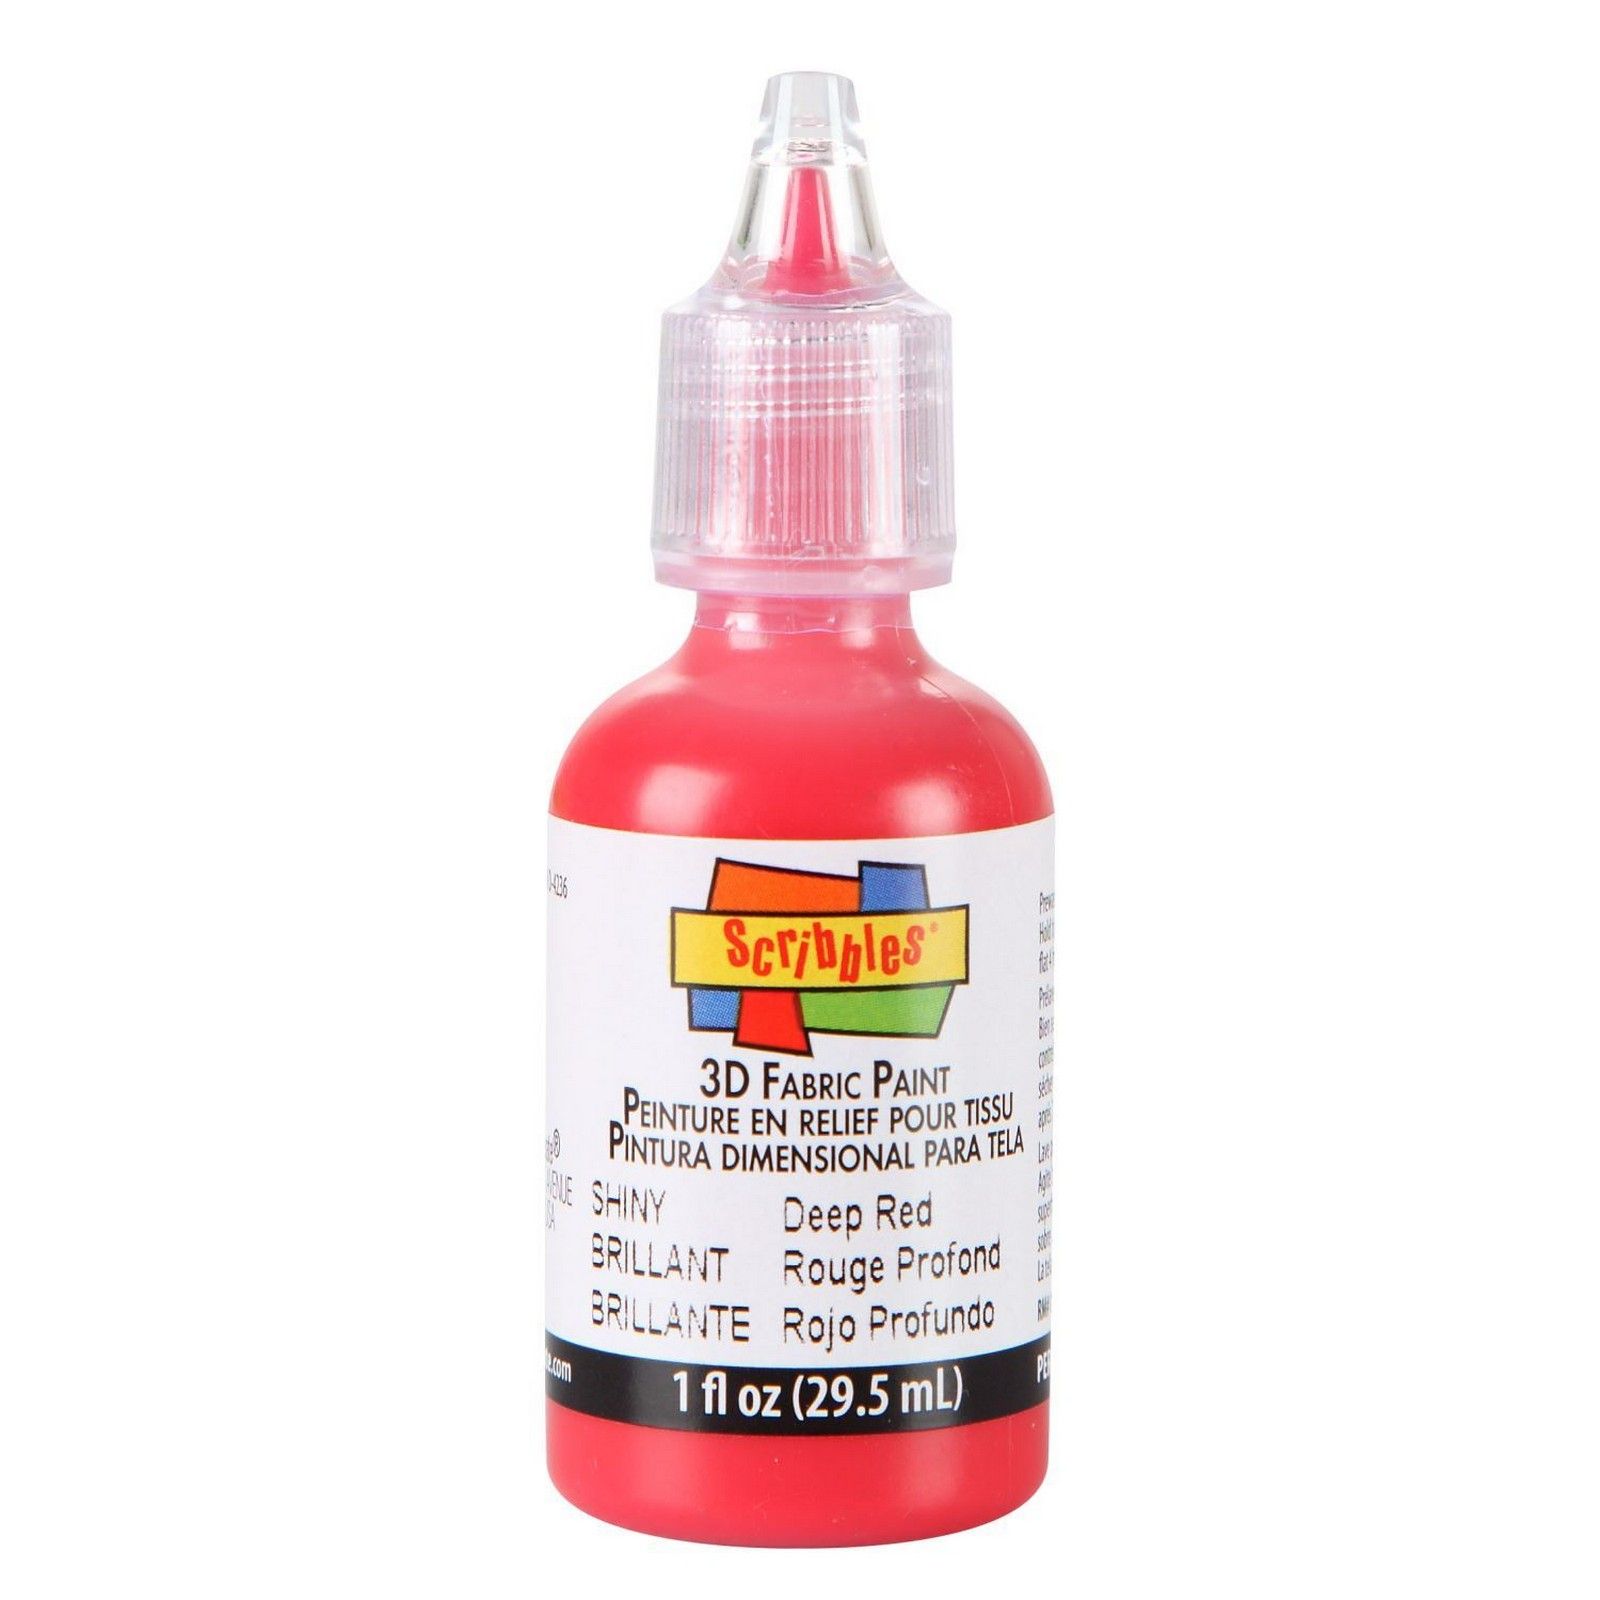 Scribbles • 3D Fabric Paint Shiny 29.5ml Deep Red